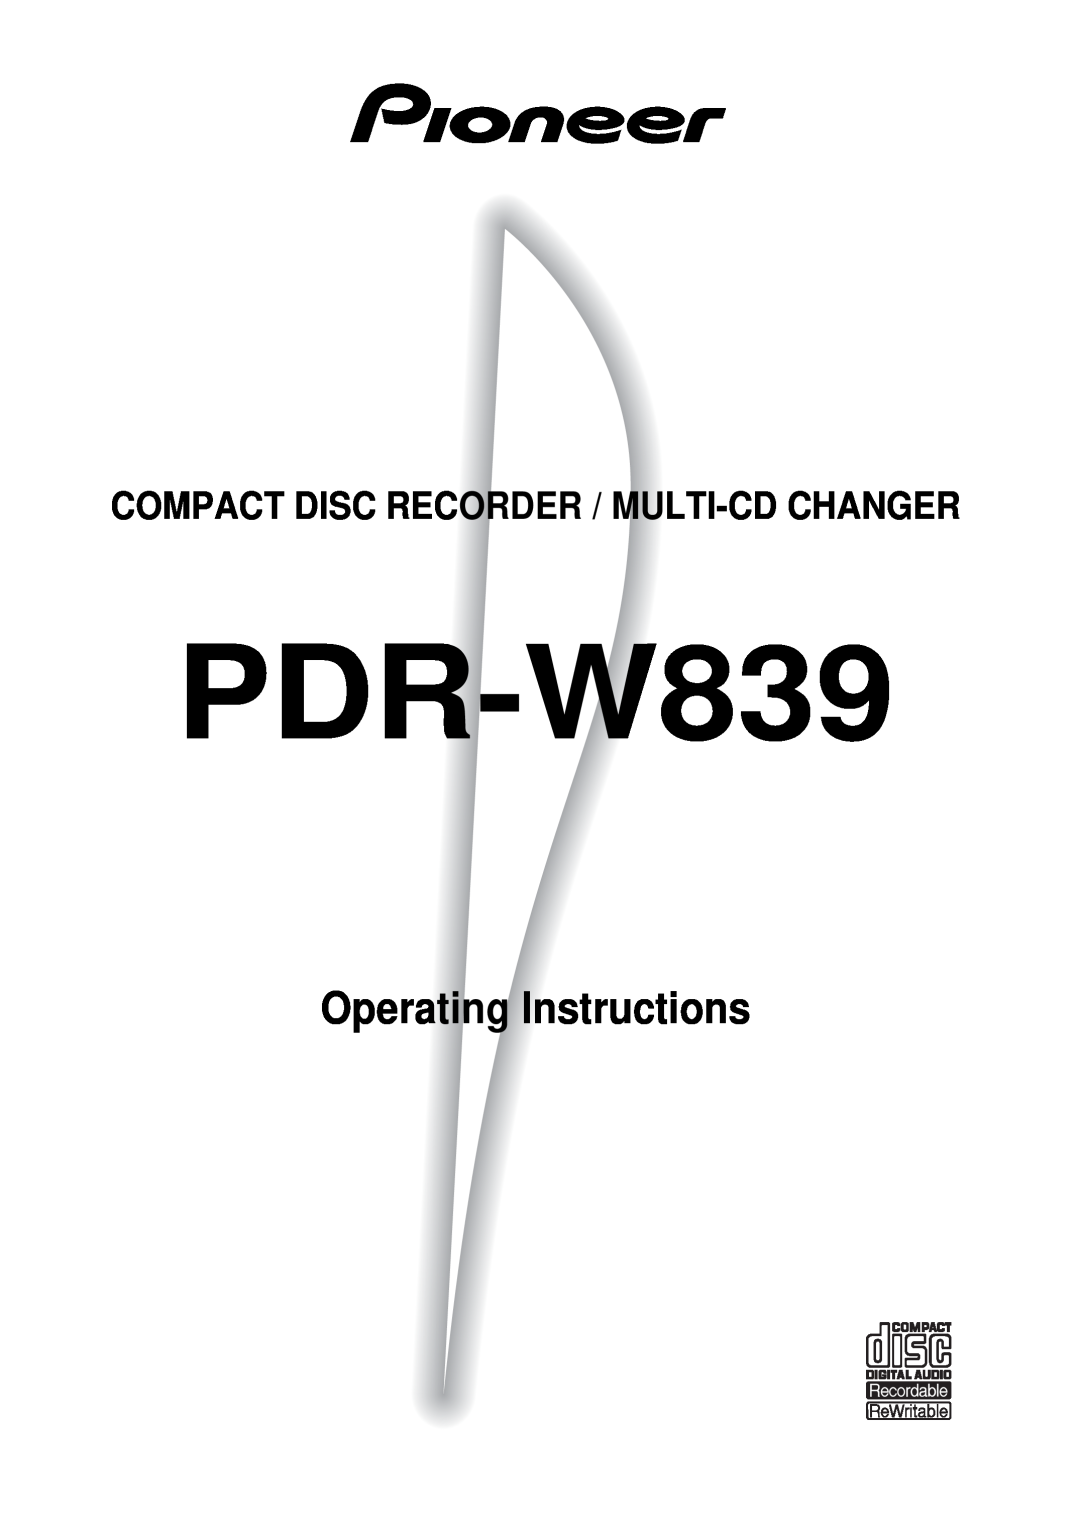 Pioneer PDR-W839 manual Operating Instructions, Compact Disc Recorder / Multi-Cdchanger 